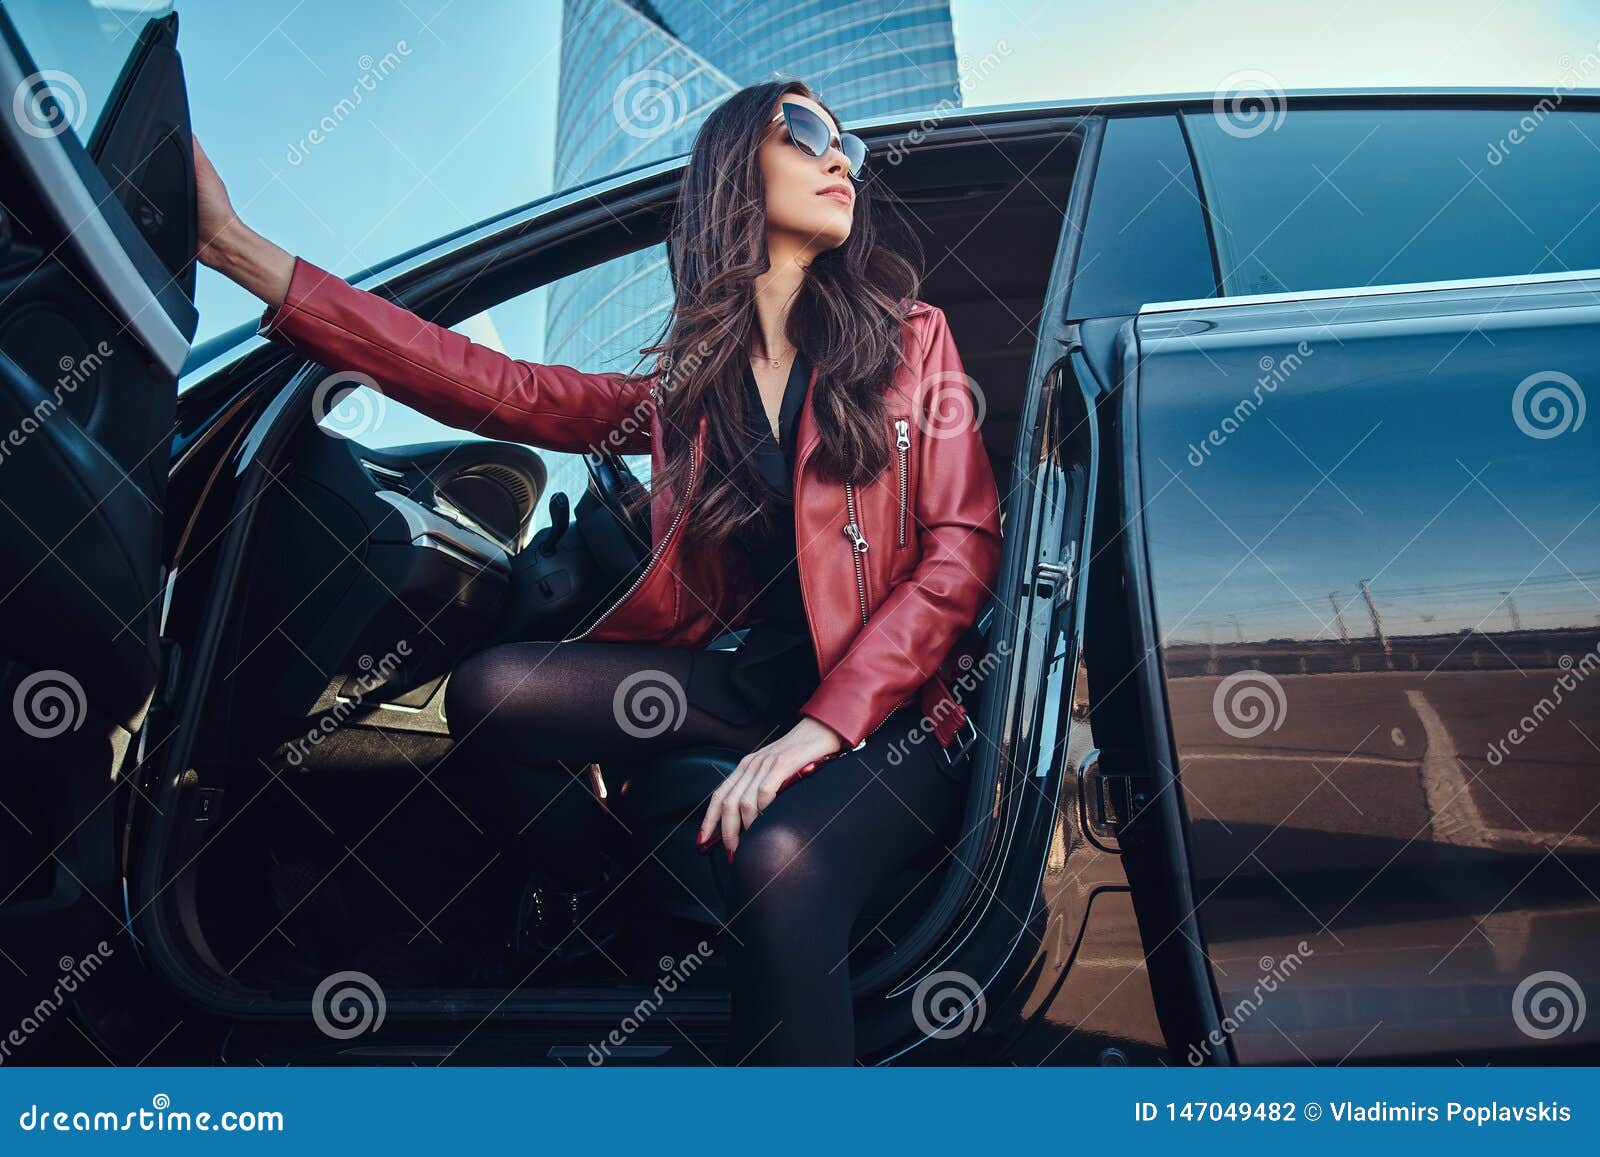 Premium Photo | Young attractive women is posing in her new car. she is  wearing red jacket and sunglasses.